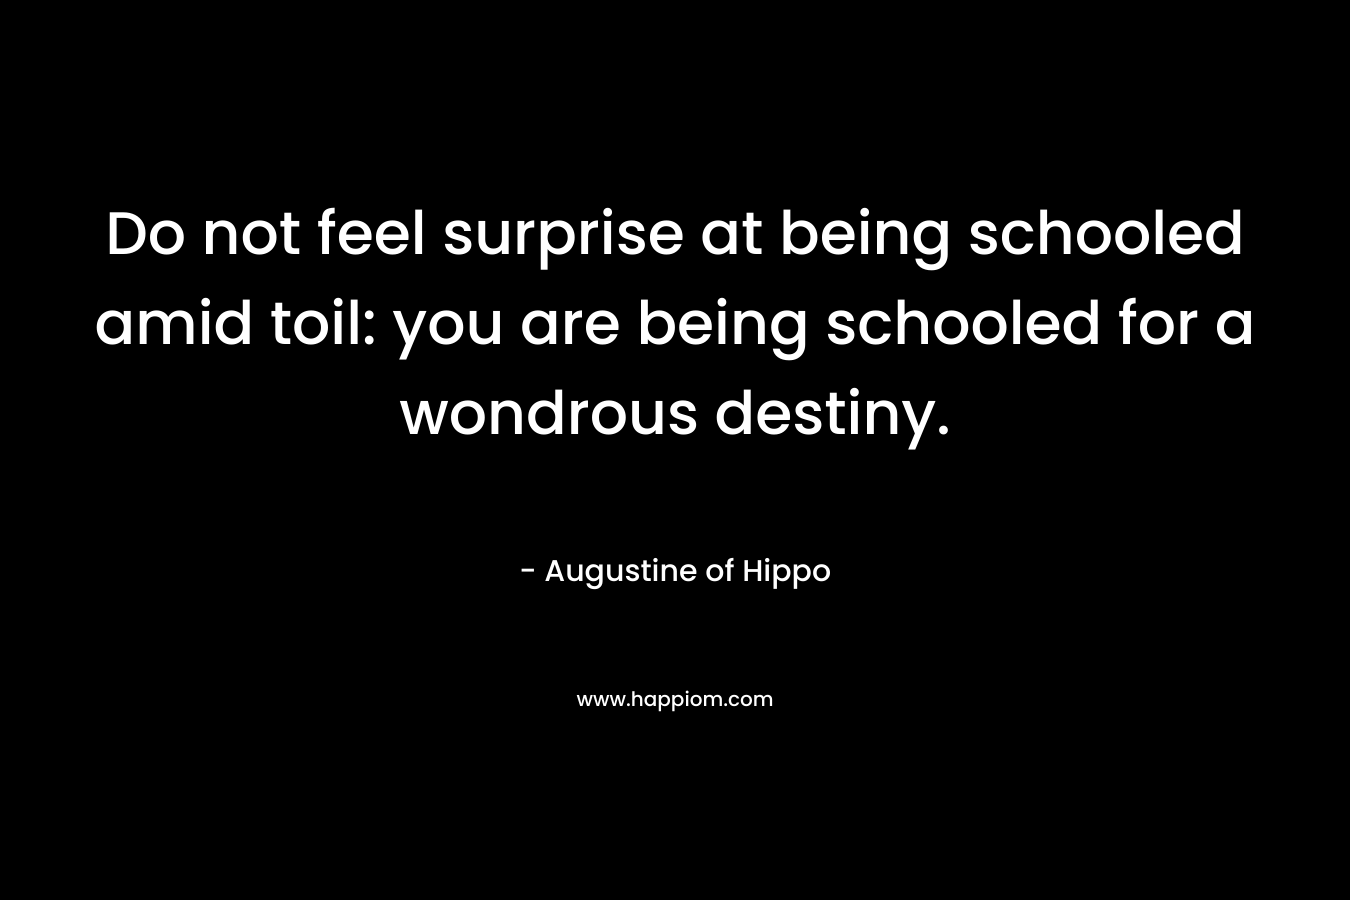 Do not feel surprise at being schooled amid toil: you are being schooled for a wondrous destiny. – Augustine of Hippo